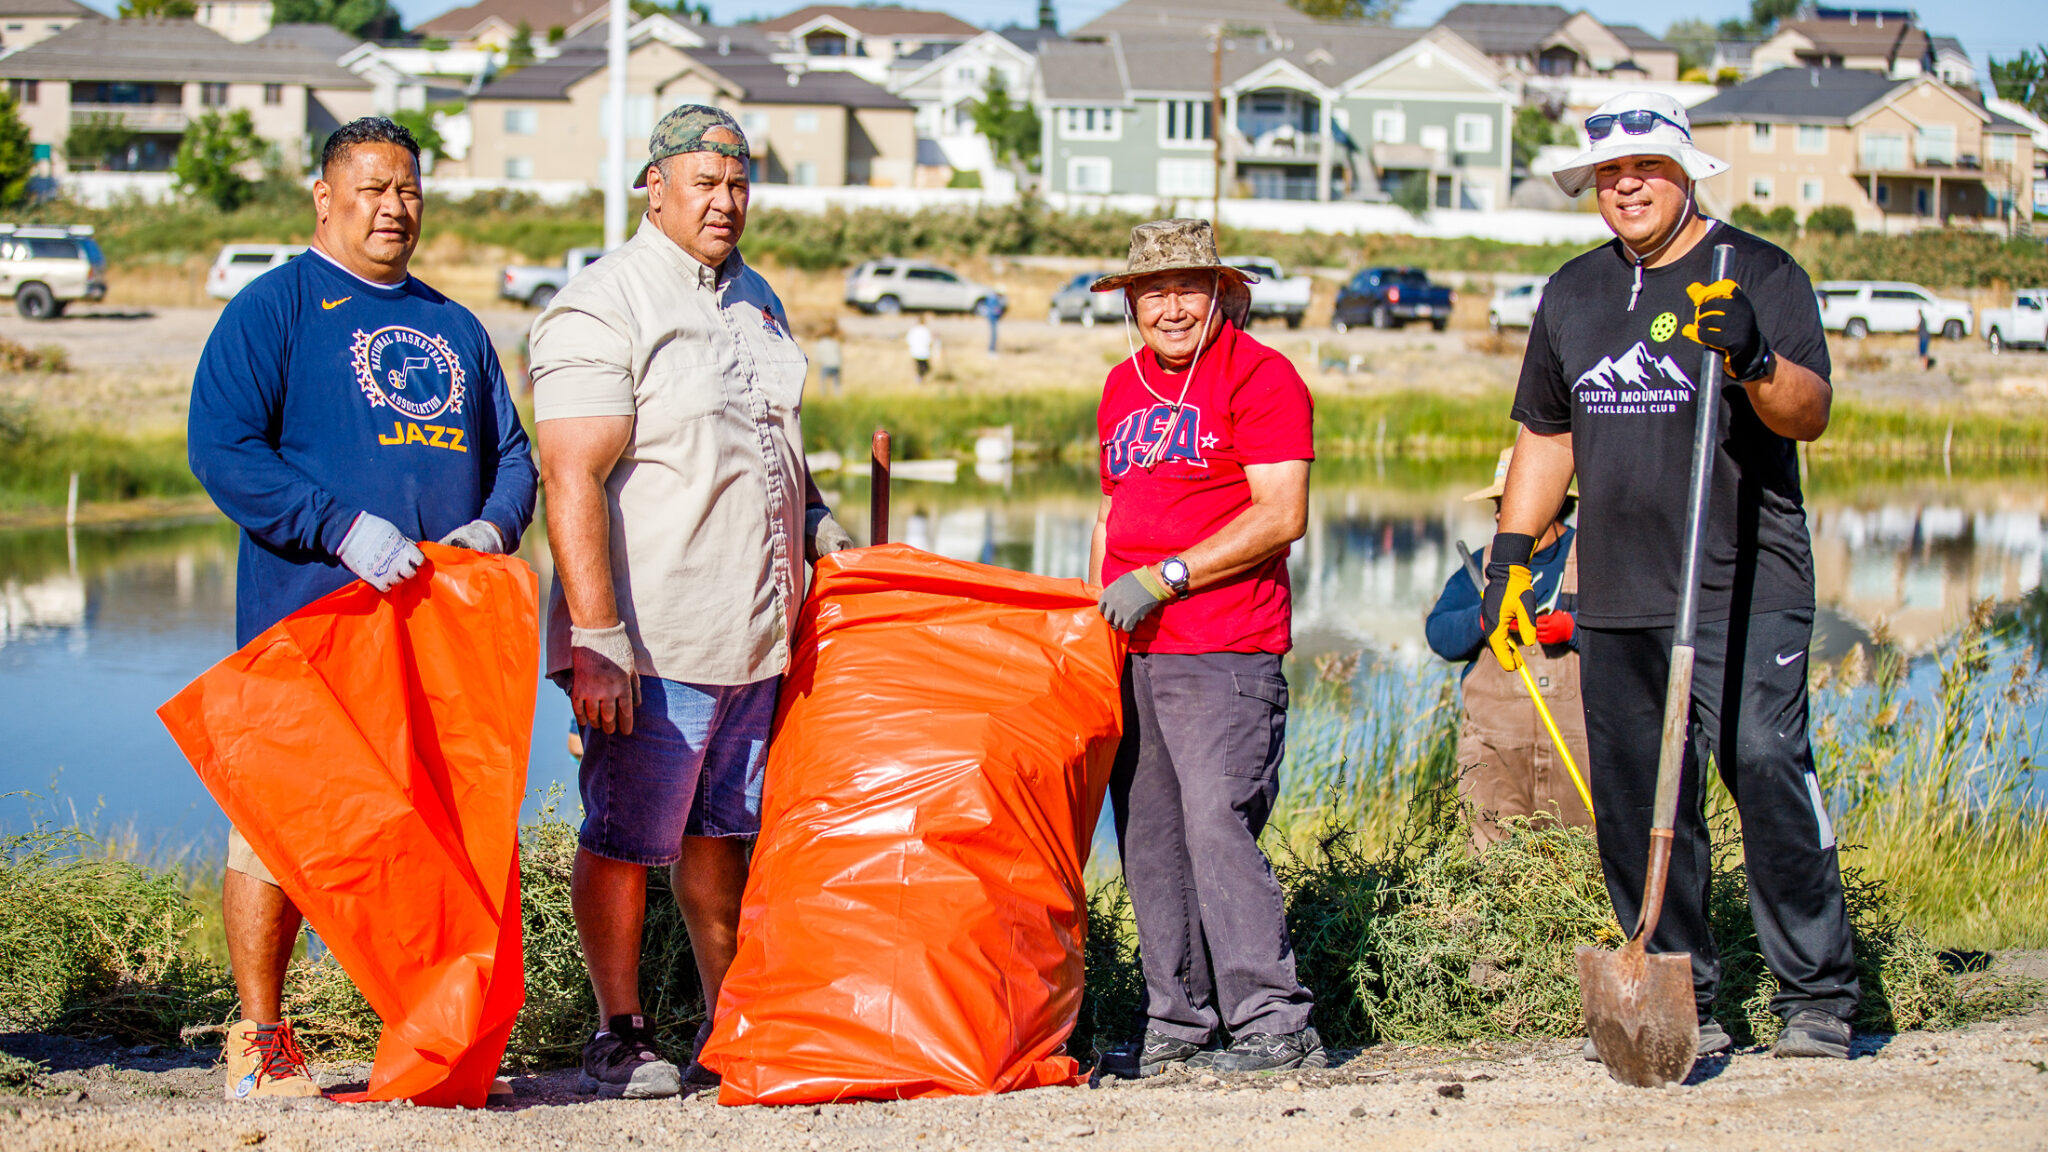 Volunteers from the community gathered on Saturday in West Jordan to collect trash and debris along...